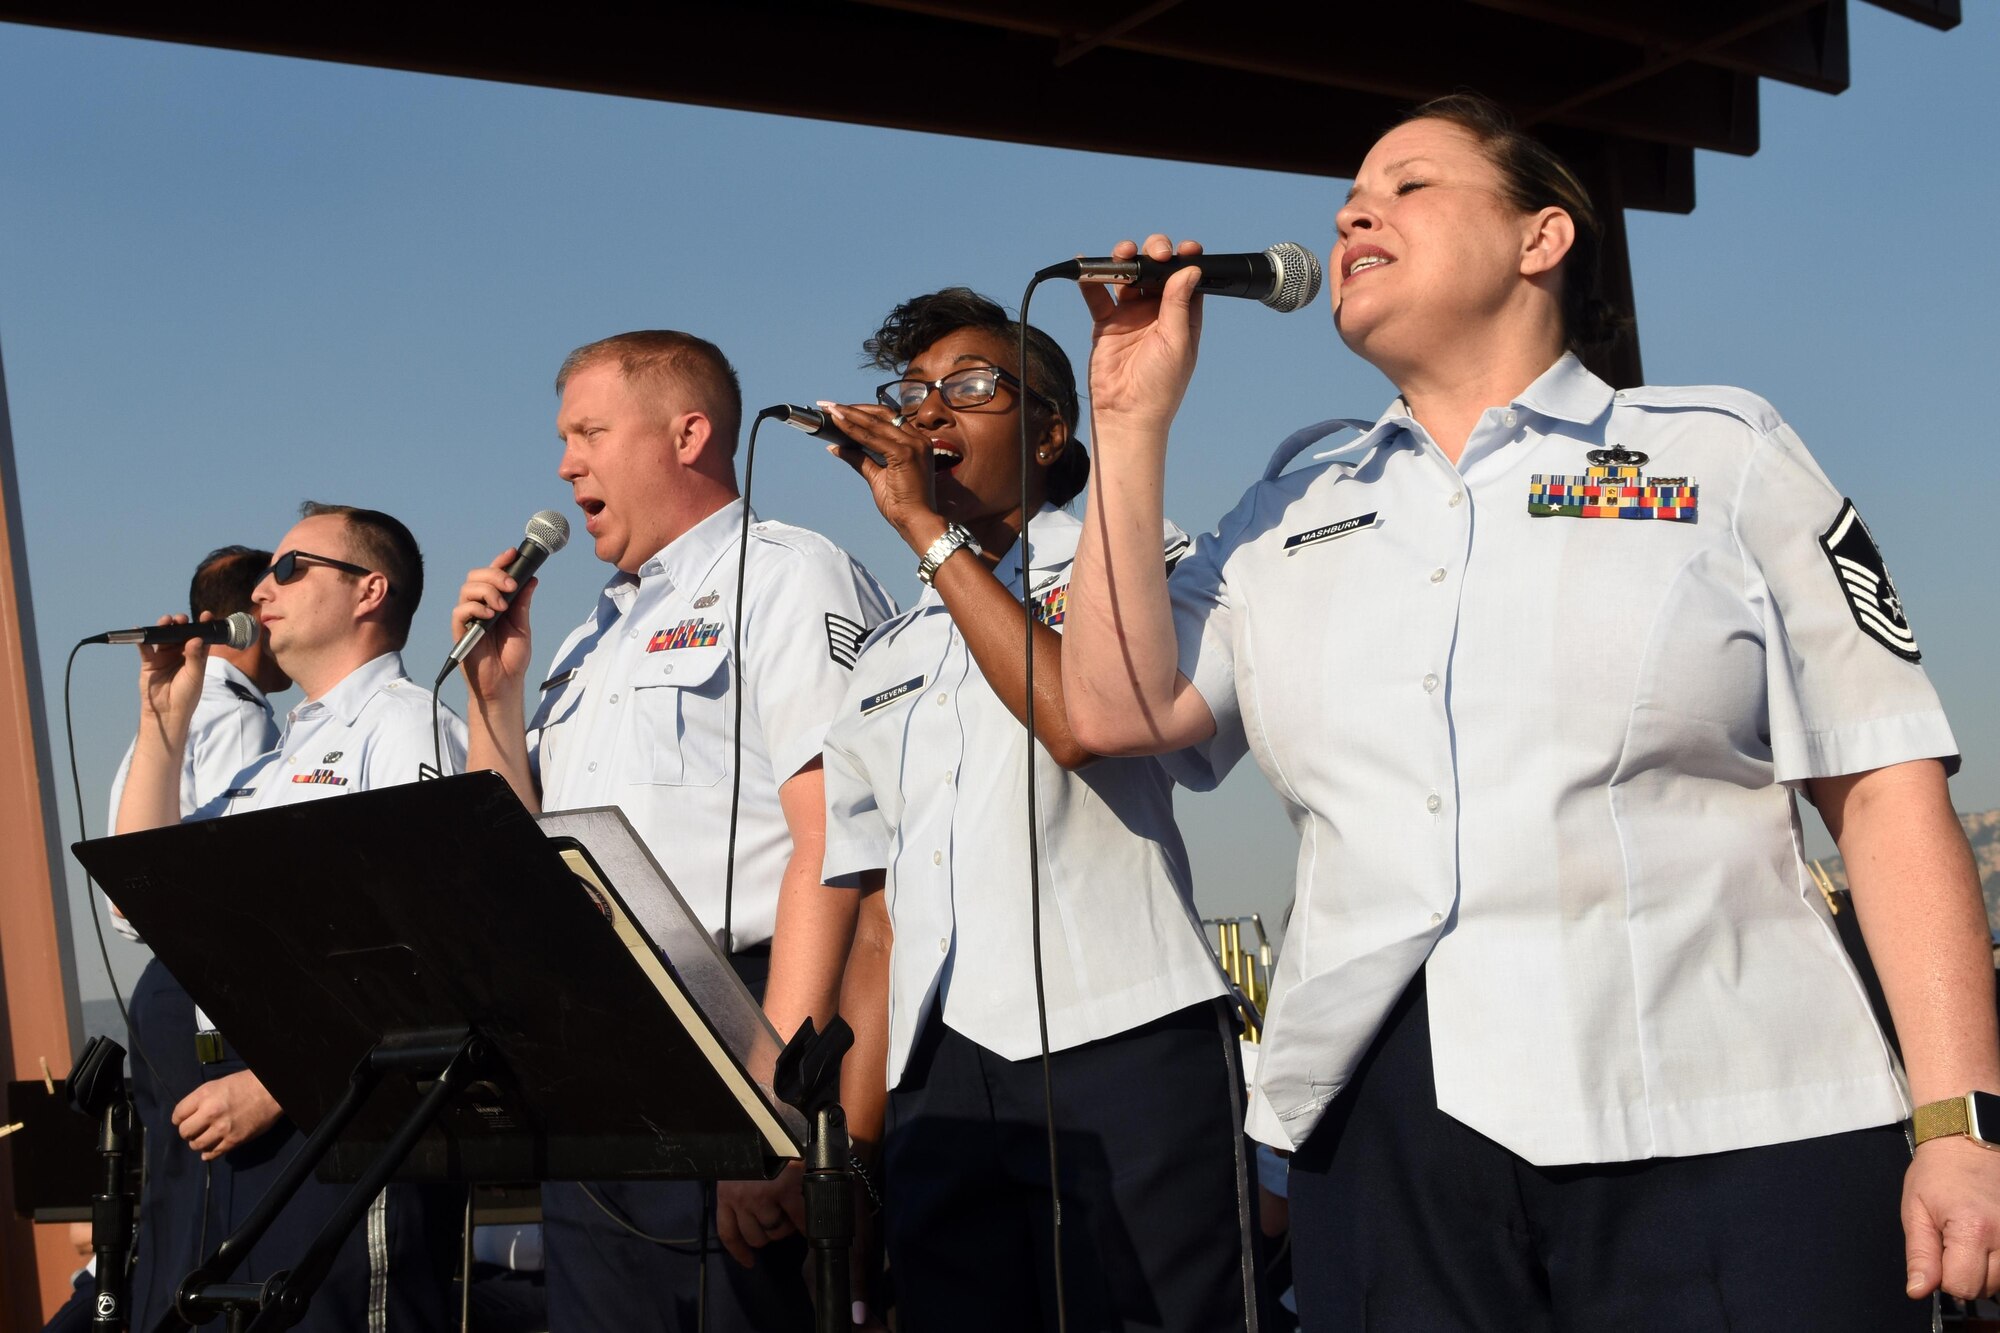 Senior Airman Will Thorton, Tech Sgt. Josh Keen, and Master Sgt.’s Erika Stevens and Shonda Mashburn, Band of the Southwest vocalists, perform a medley of songs by famous composer William Grant Still during a show June 29 in Sedona, NM. The performance featured music from other American composers, Hollywood legends, and well-known blockbusters. (Texas Air National Guard photo by Staff Sgt. Kristina Overton)